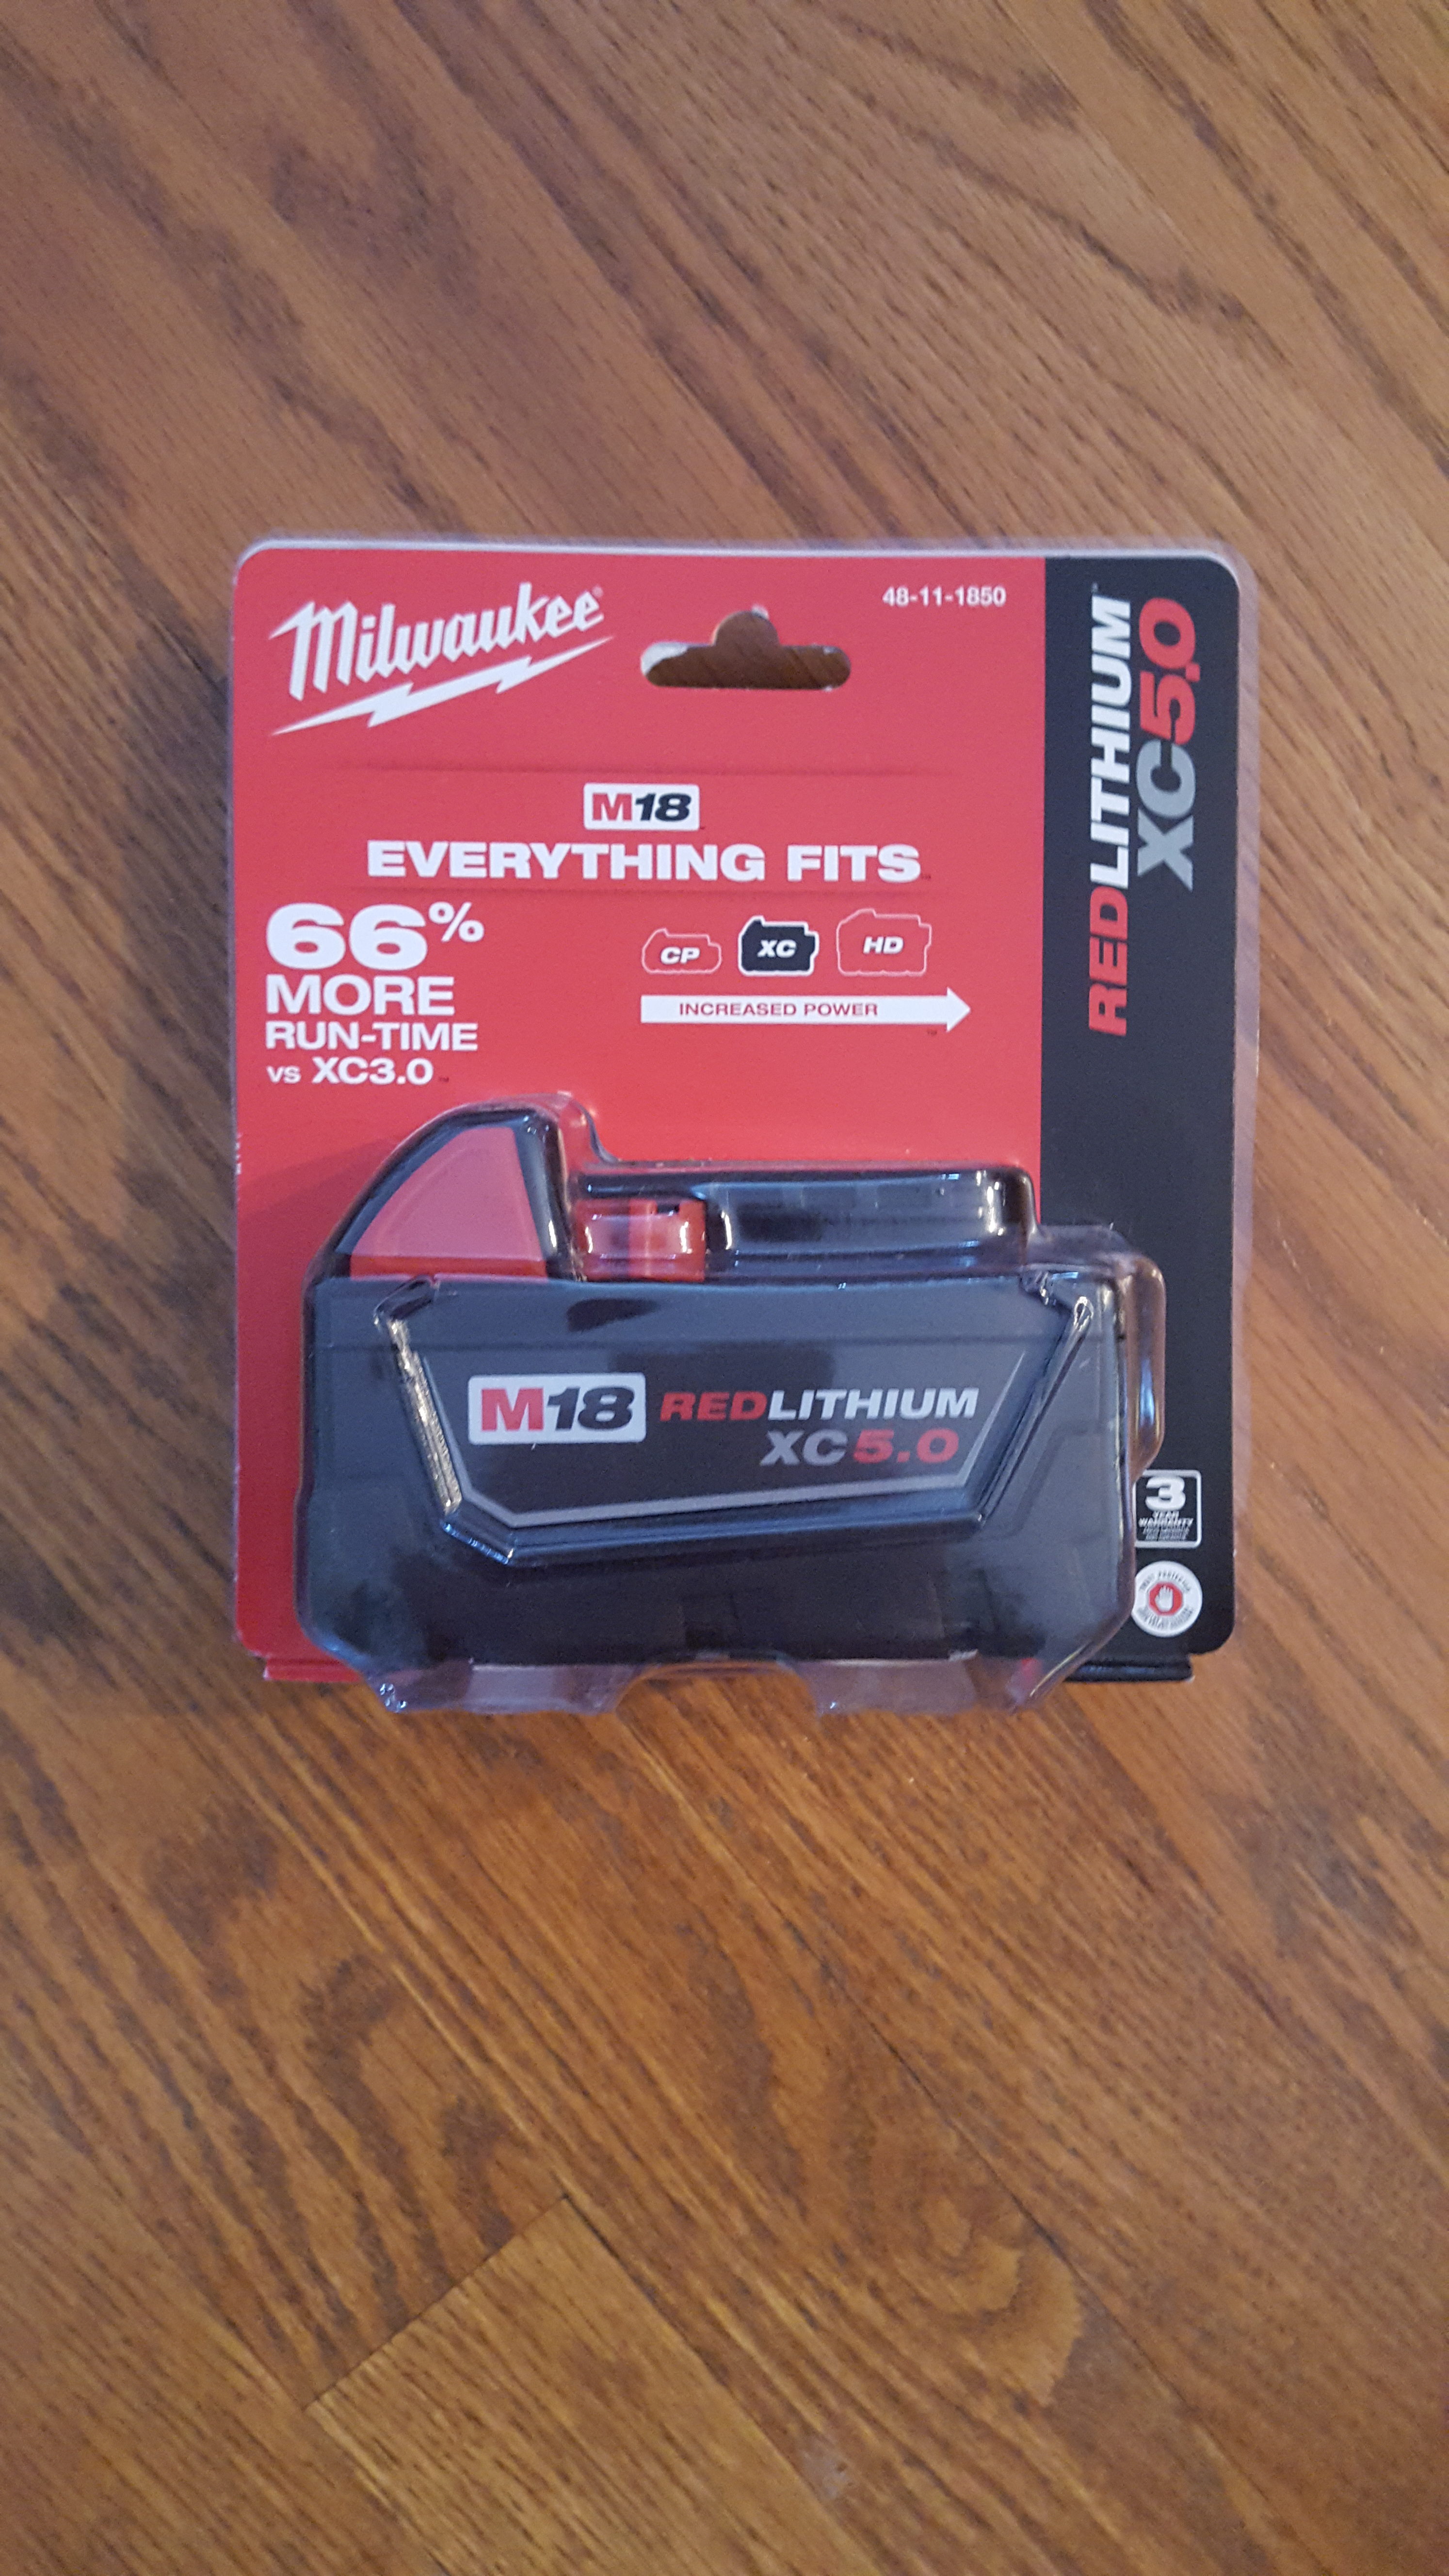 Milwaukee Red Lithium XC5.0 Battery - Classified Ads | In-Depth Outdoors